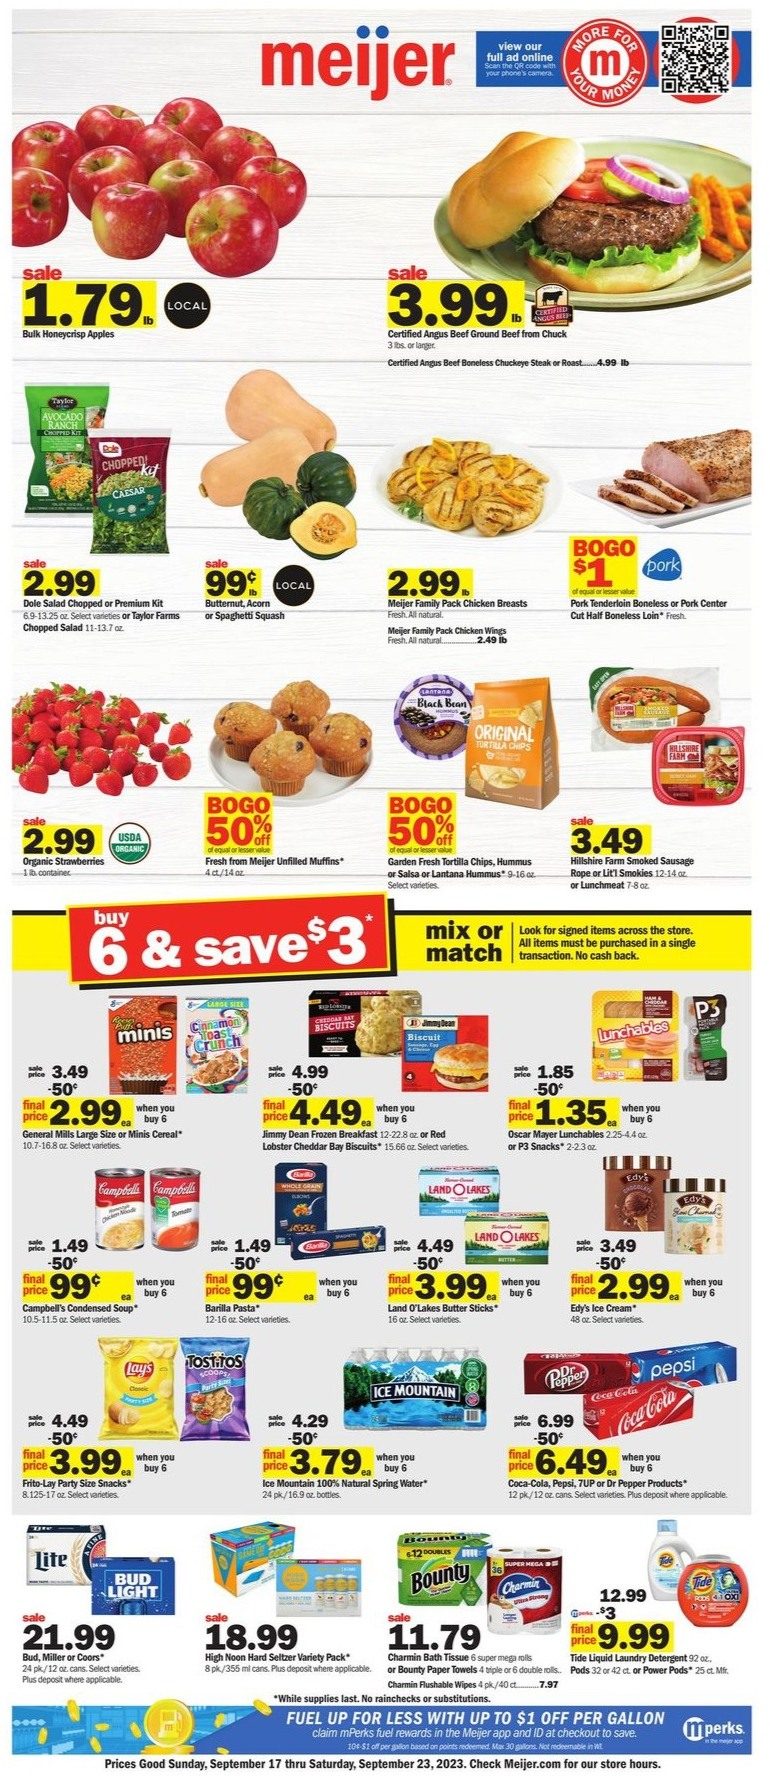 Meijer Weekly Ad 17th – 23rd September 2023 Page 1